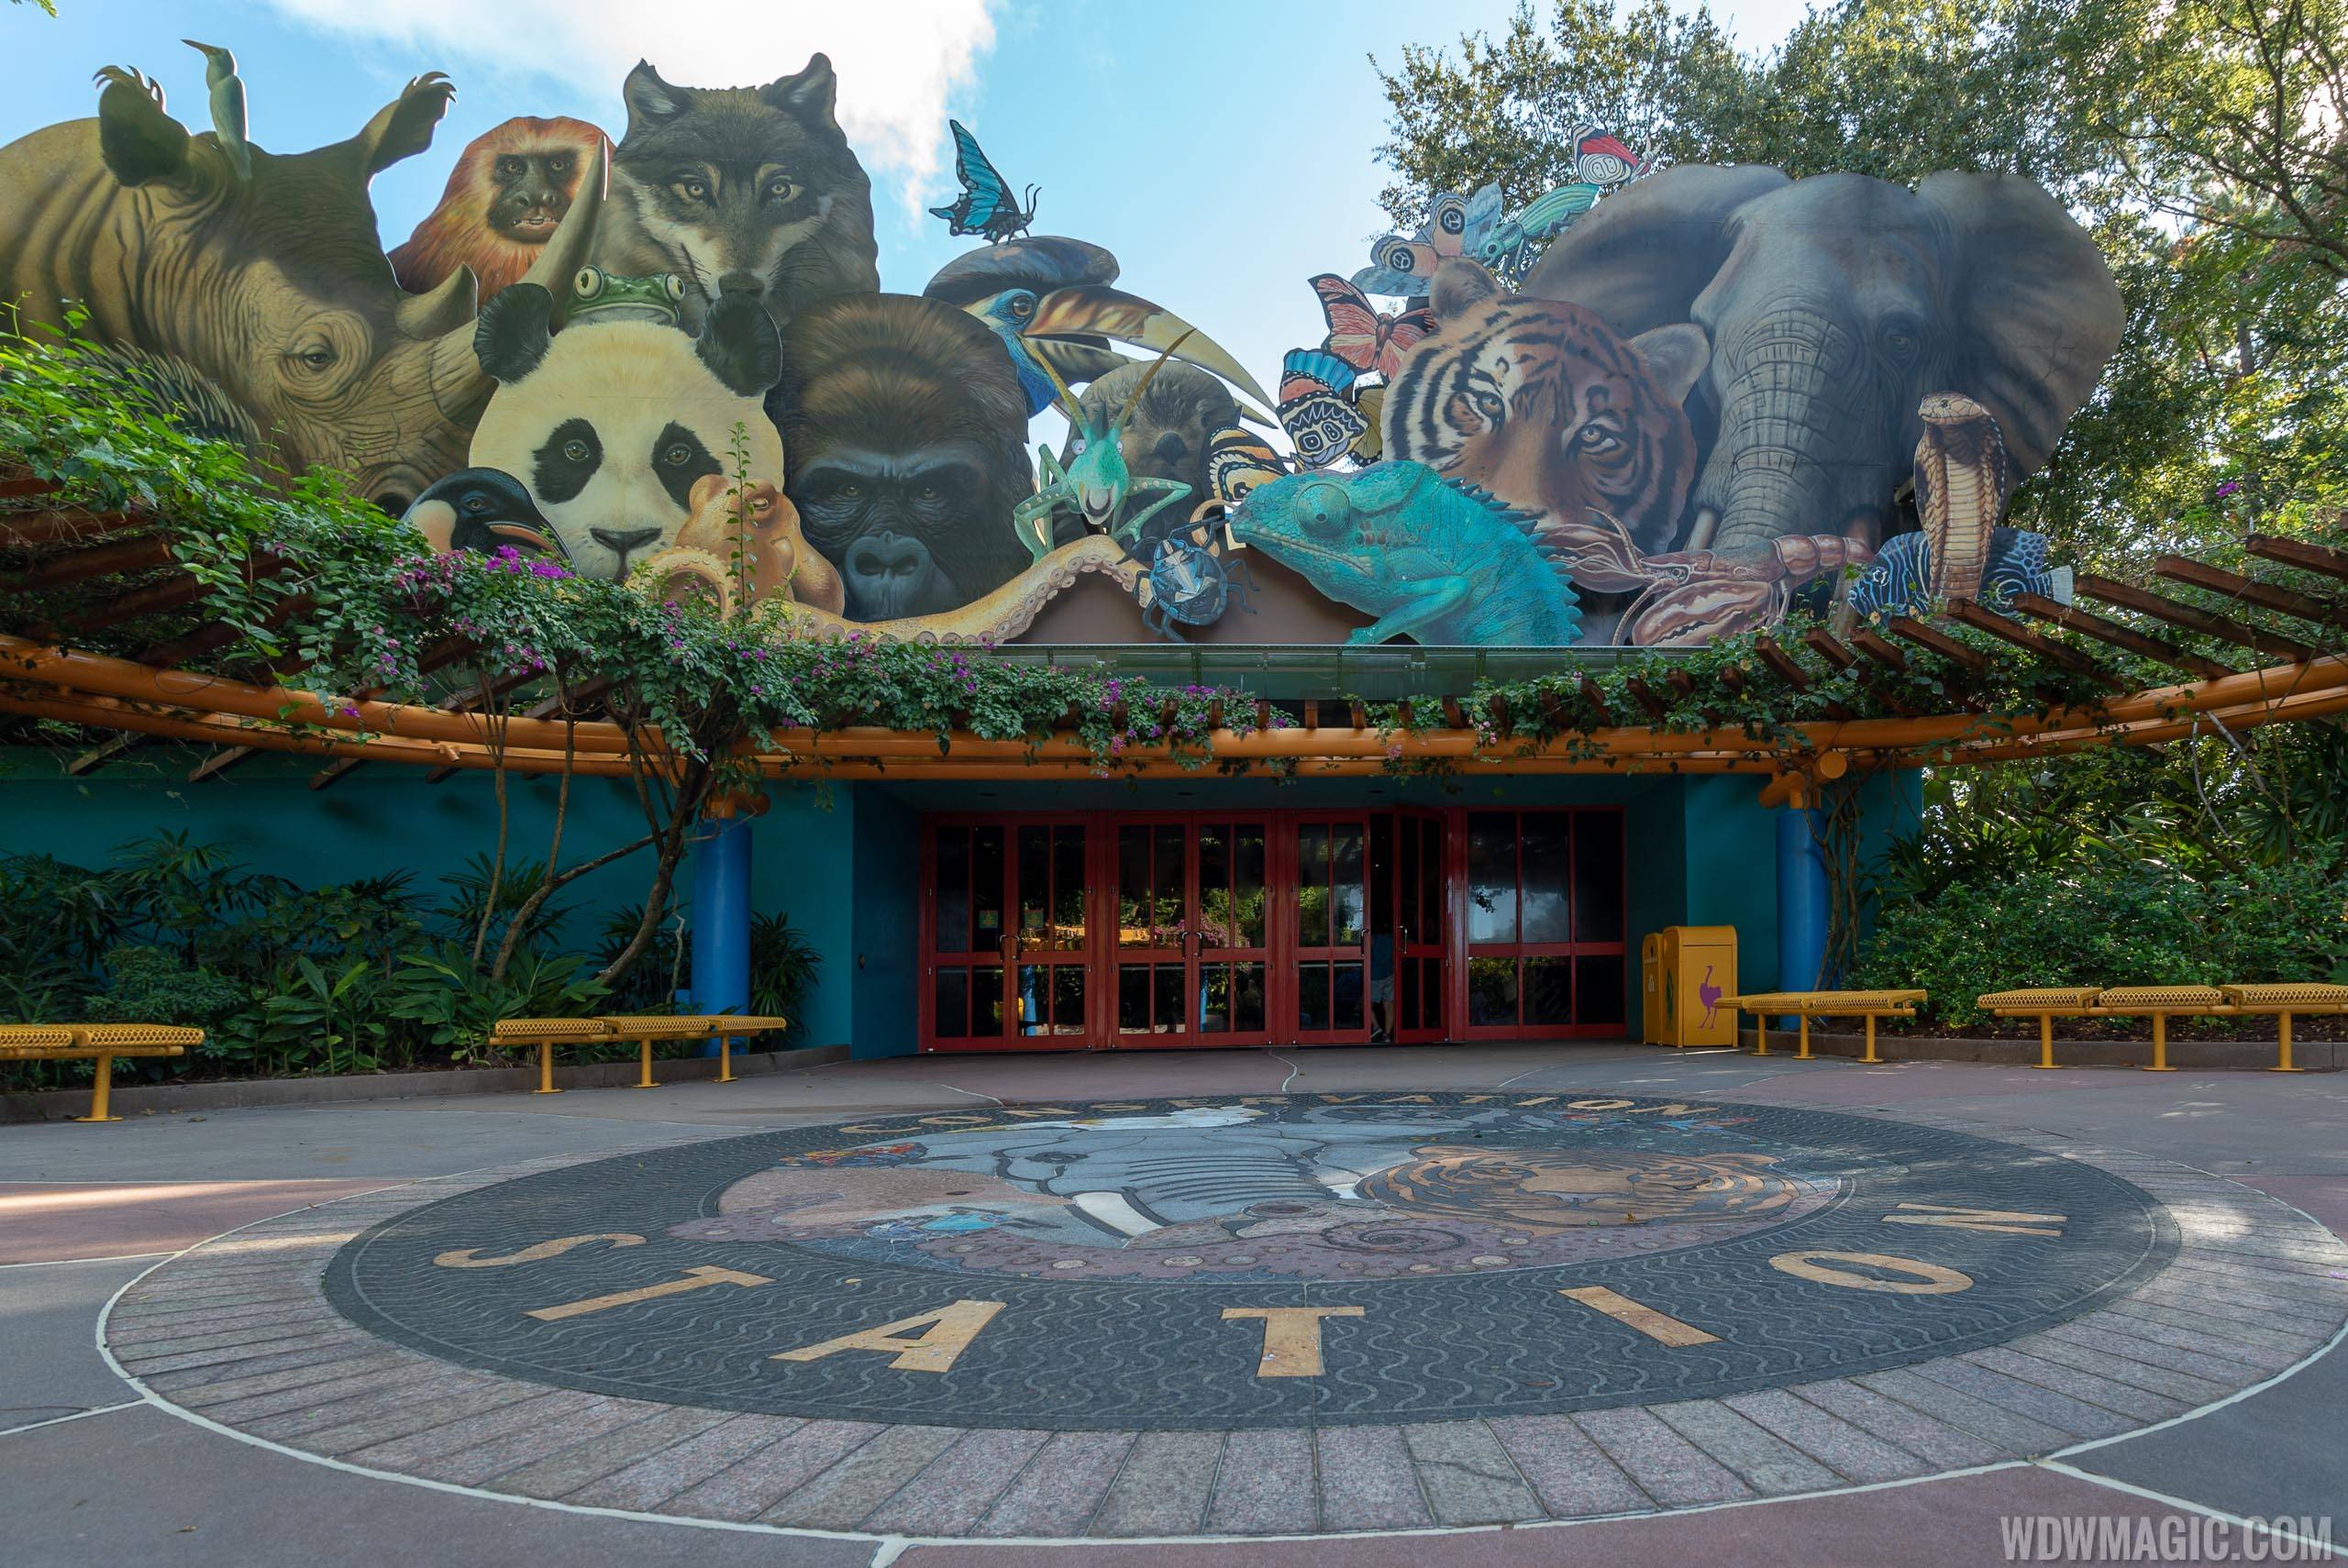 Date set for reopening of Rafiki's Planet Watch along with new Animation Experience 